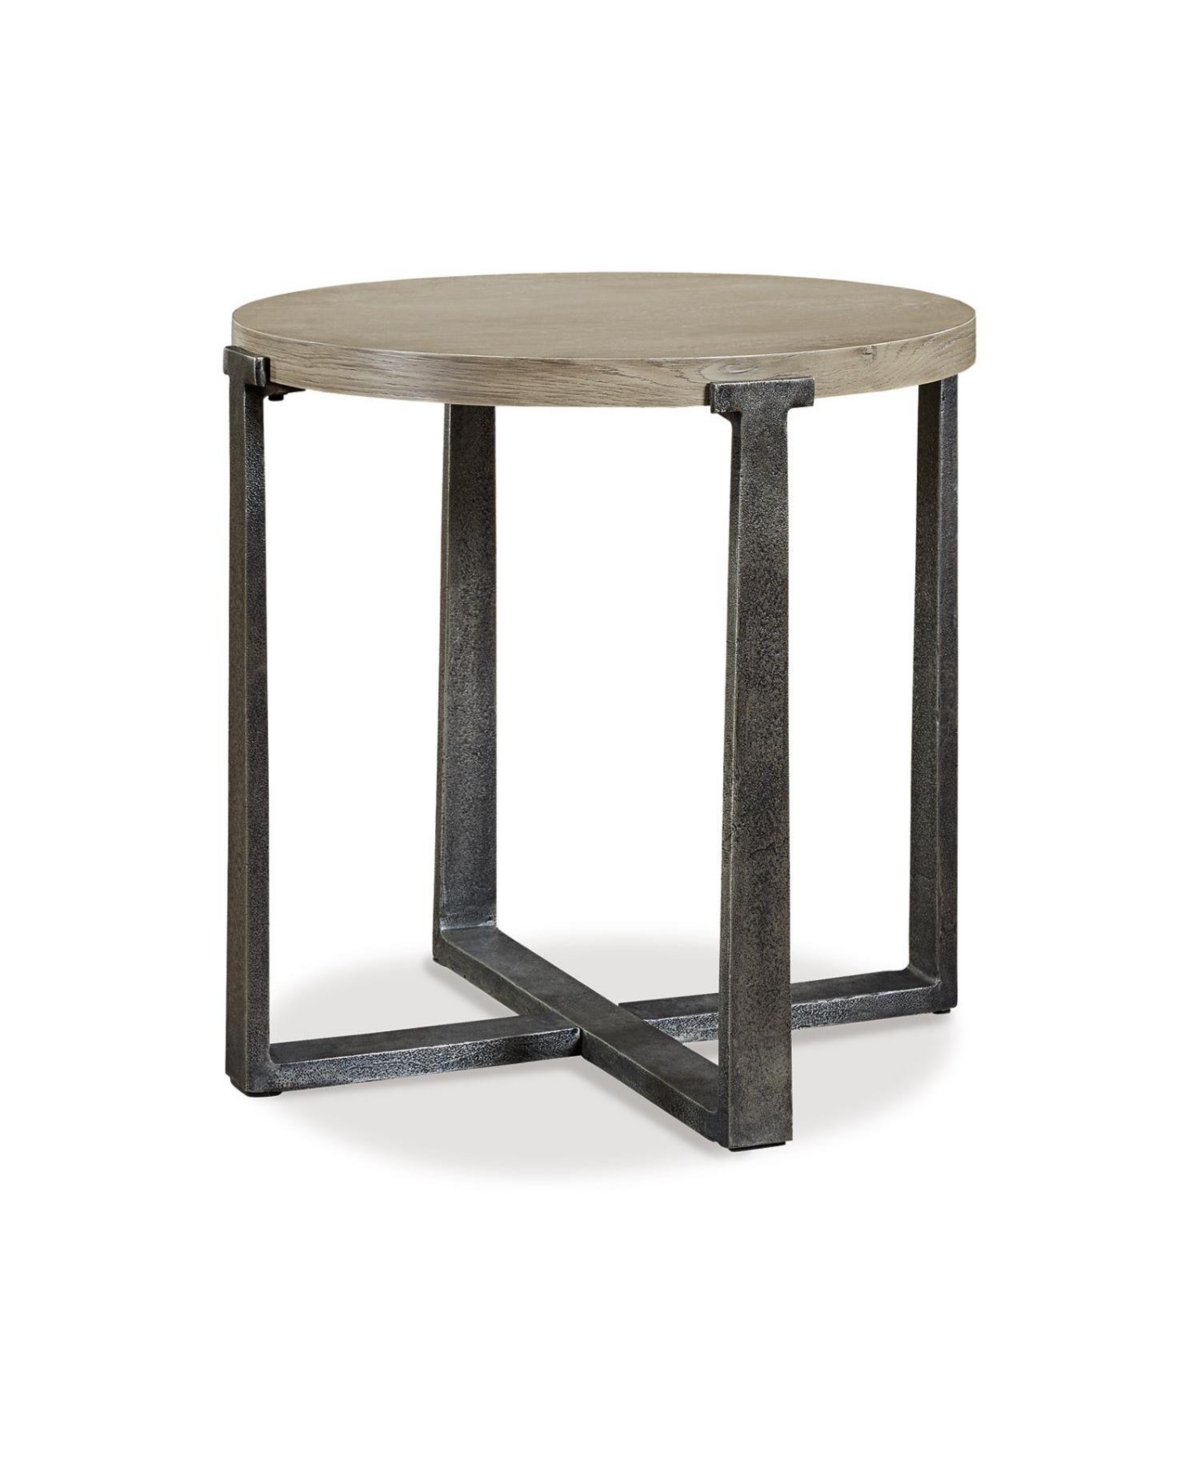 Signature Design By Ashley Dalenville Round End Table In Gray